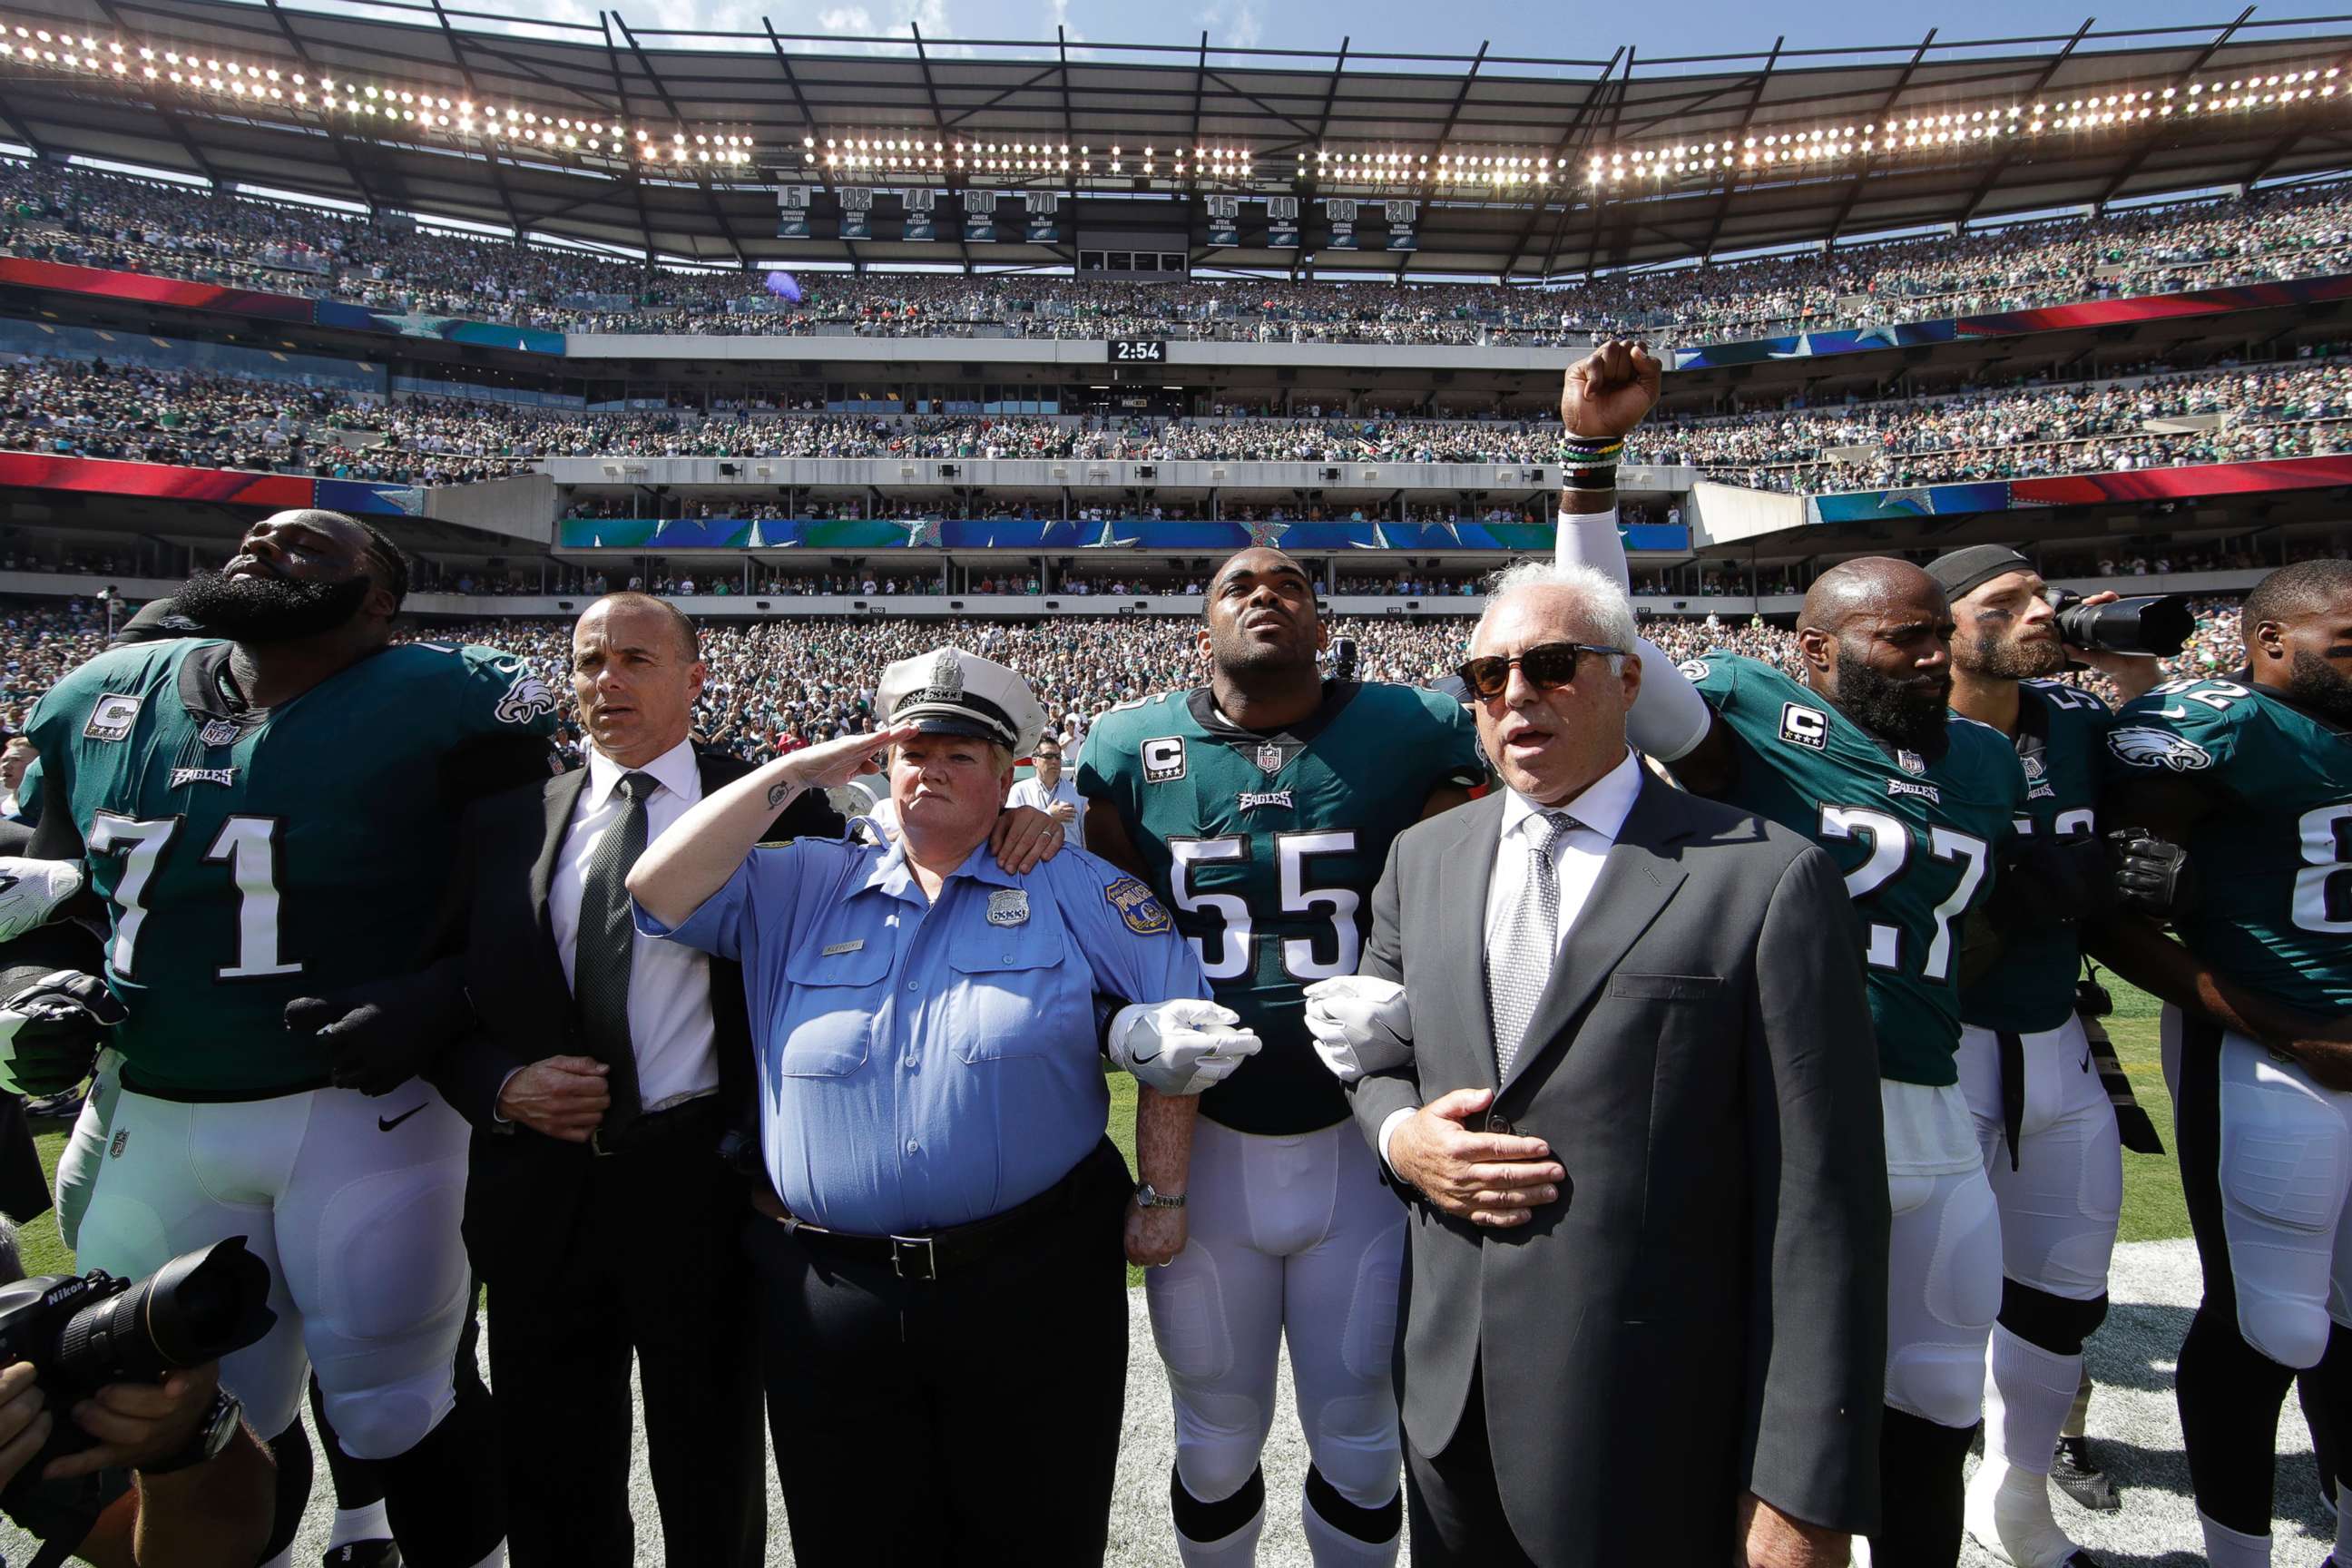 PHOTO: Philadelphia Eagles players and owners Jeffrey Lurie stand for the national anthem before an NFL football game against the New York Giants, Sept. 24, 2017, in Philadelphia.